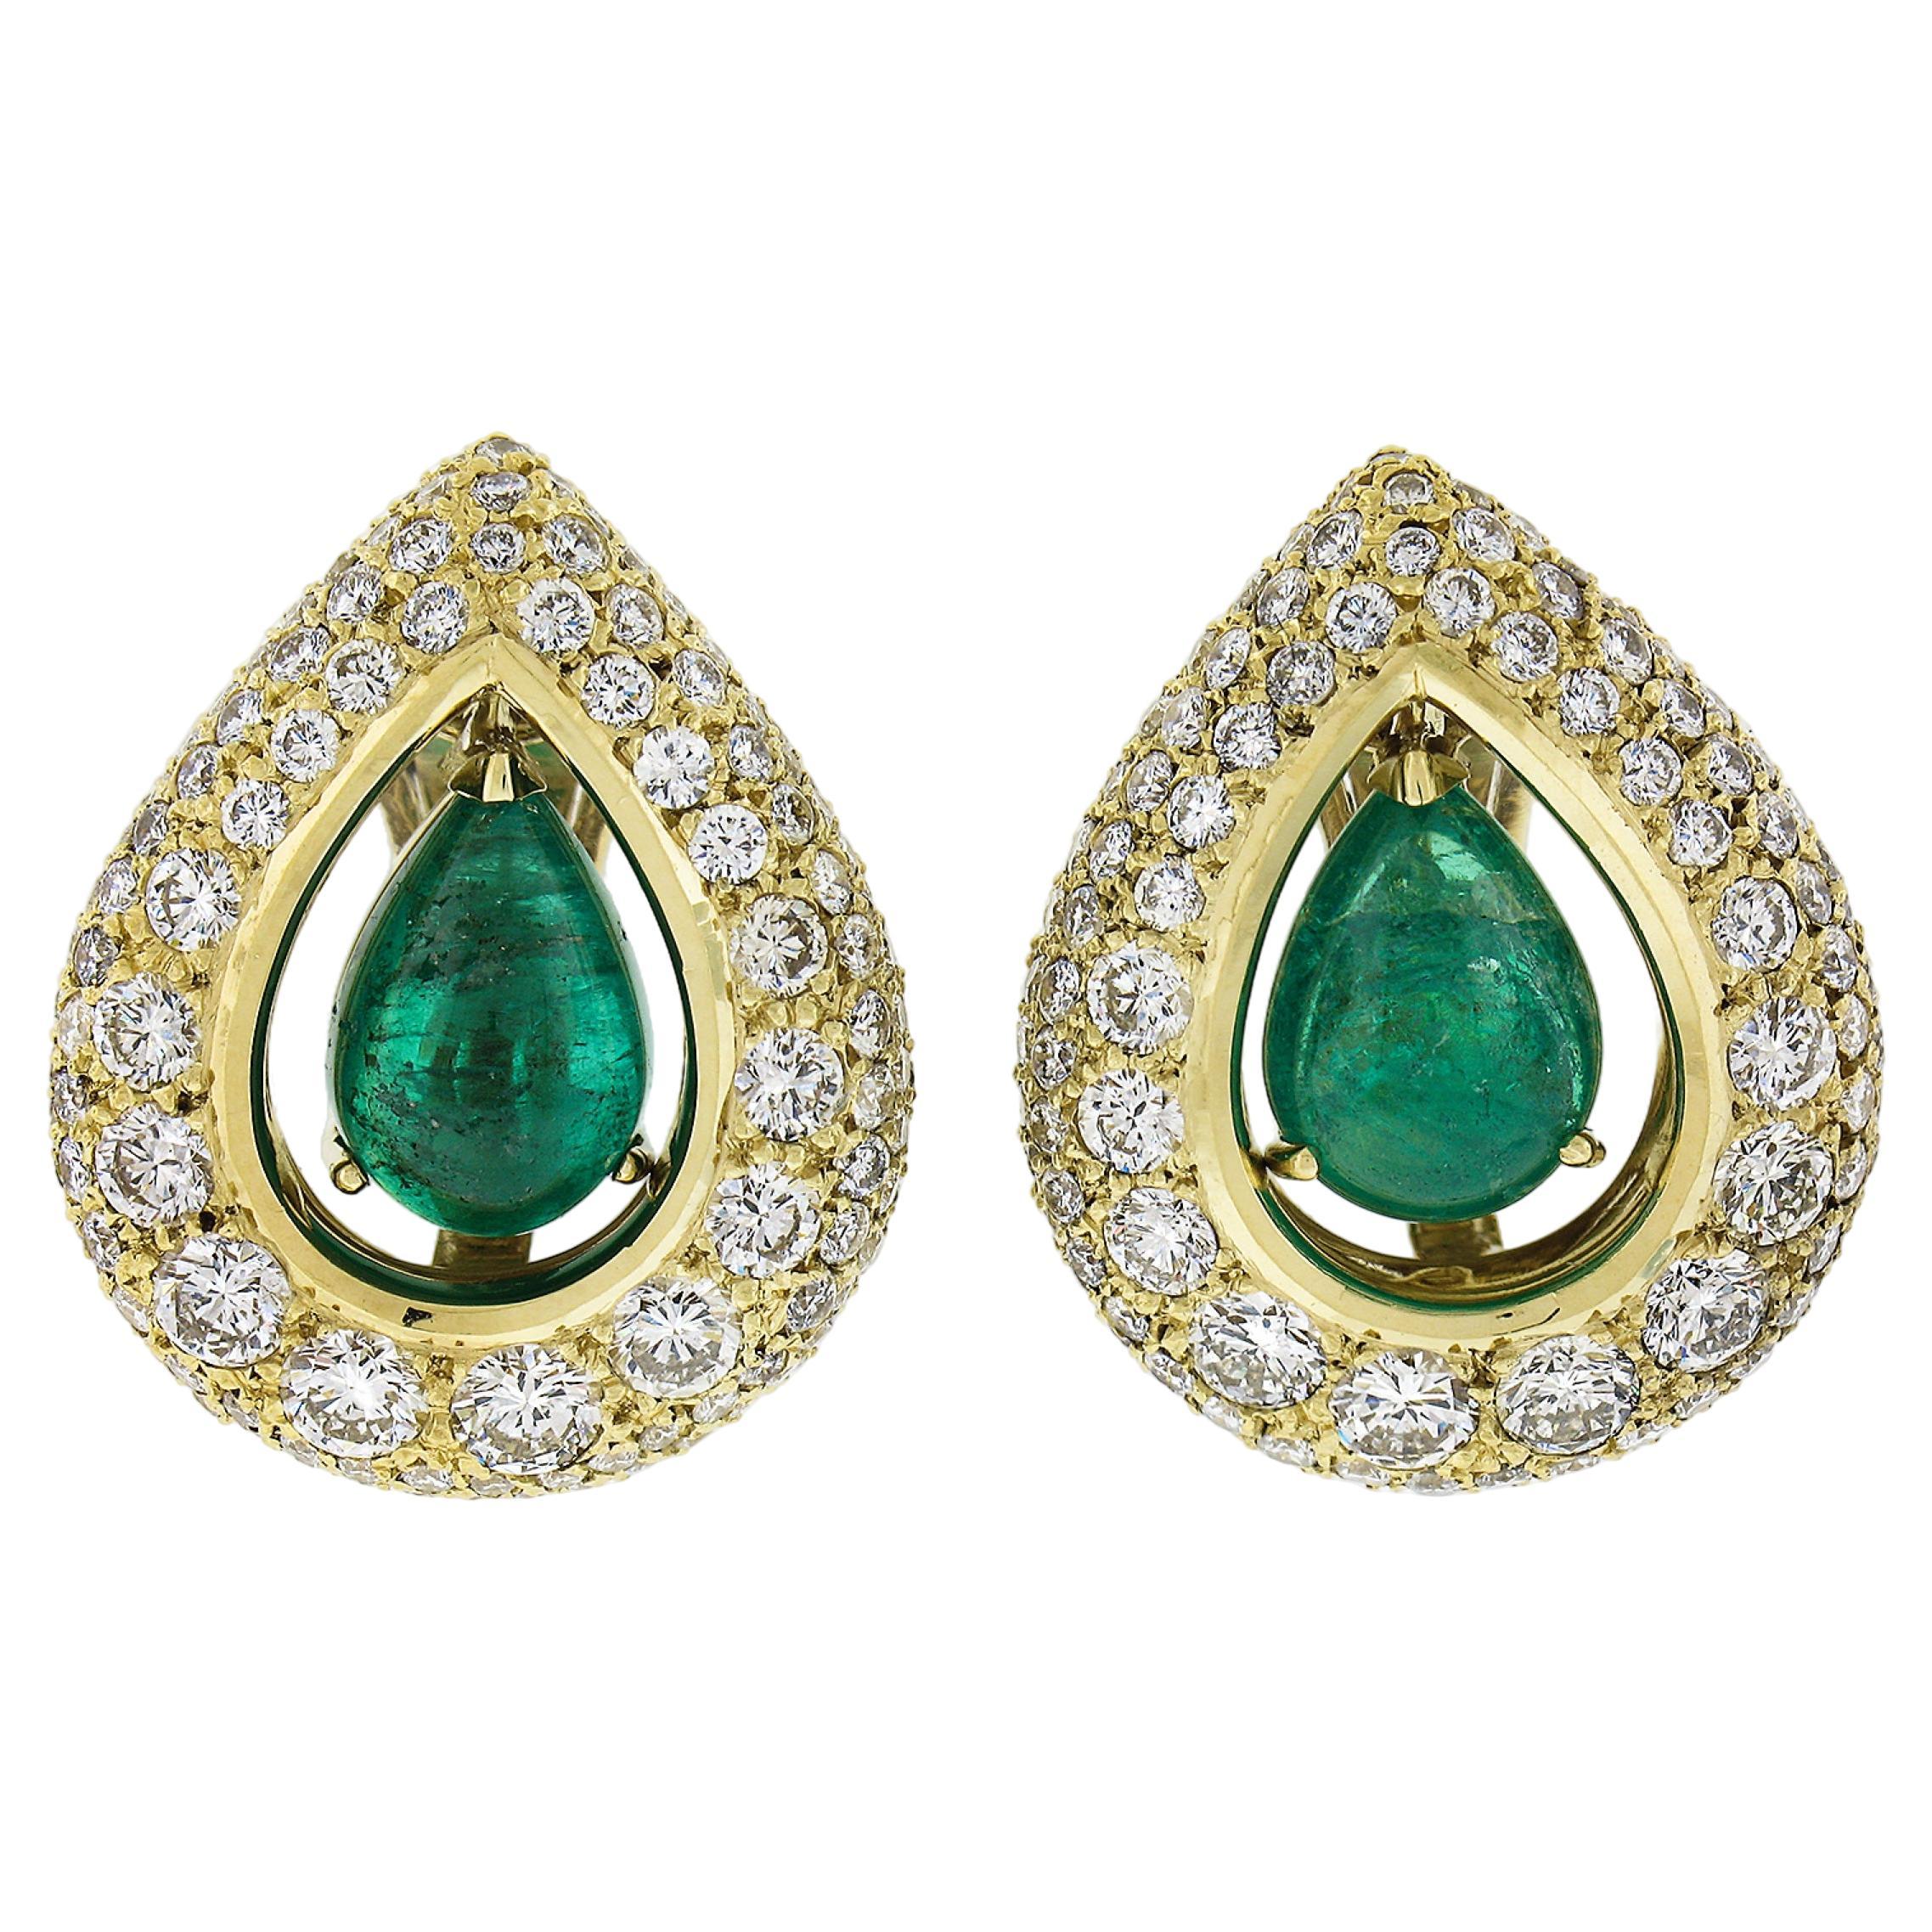 Vintage Large 18k Gold 15.0ctw GIA Pear Cabochon Emerald & Diamond Earrings